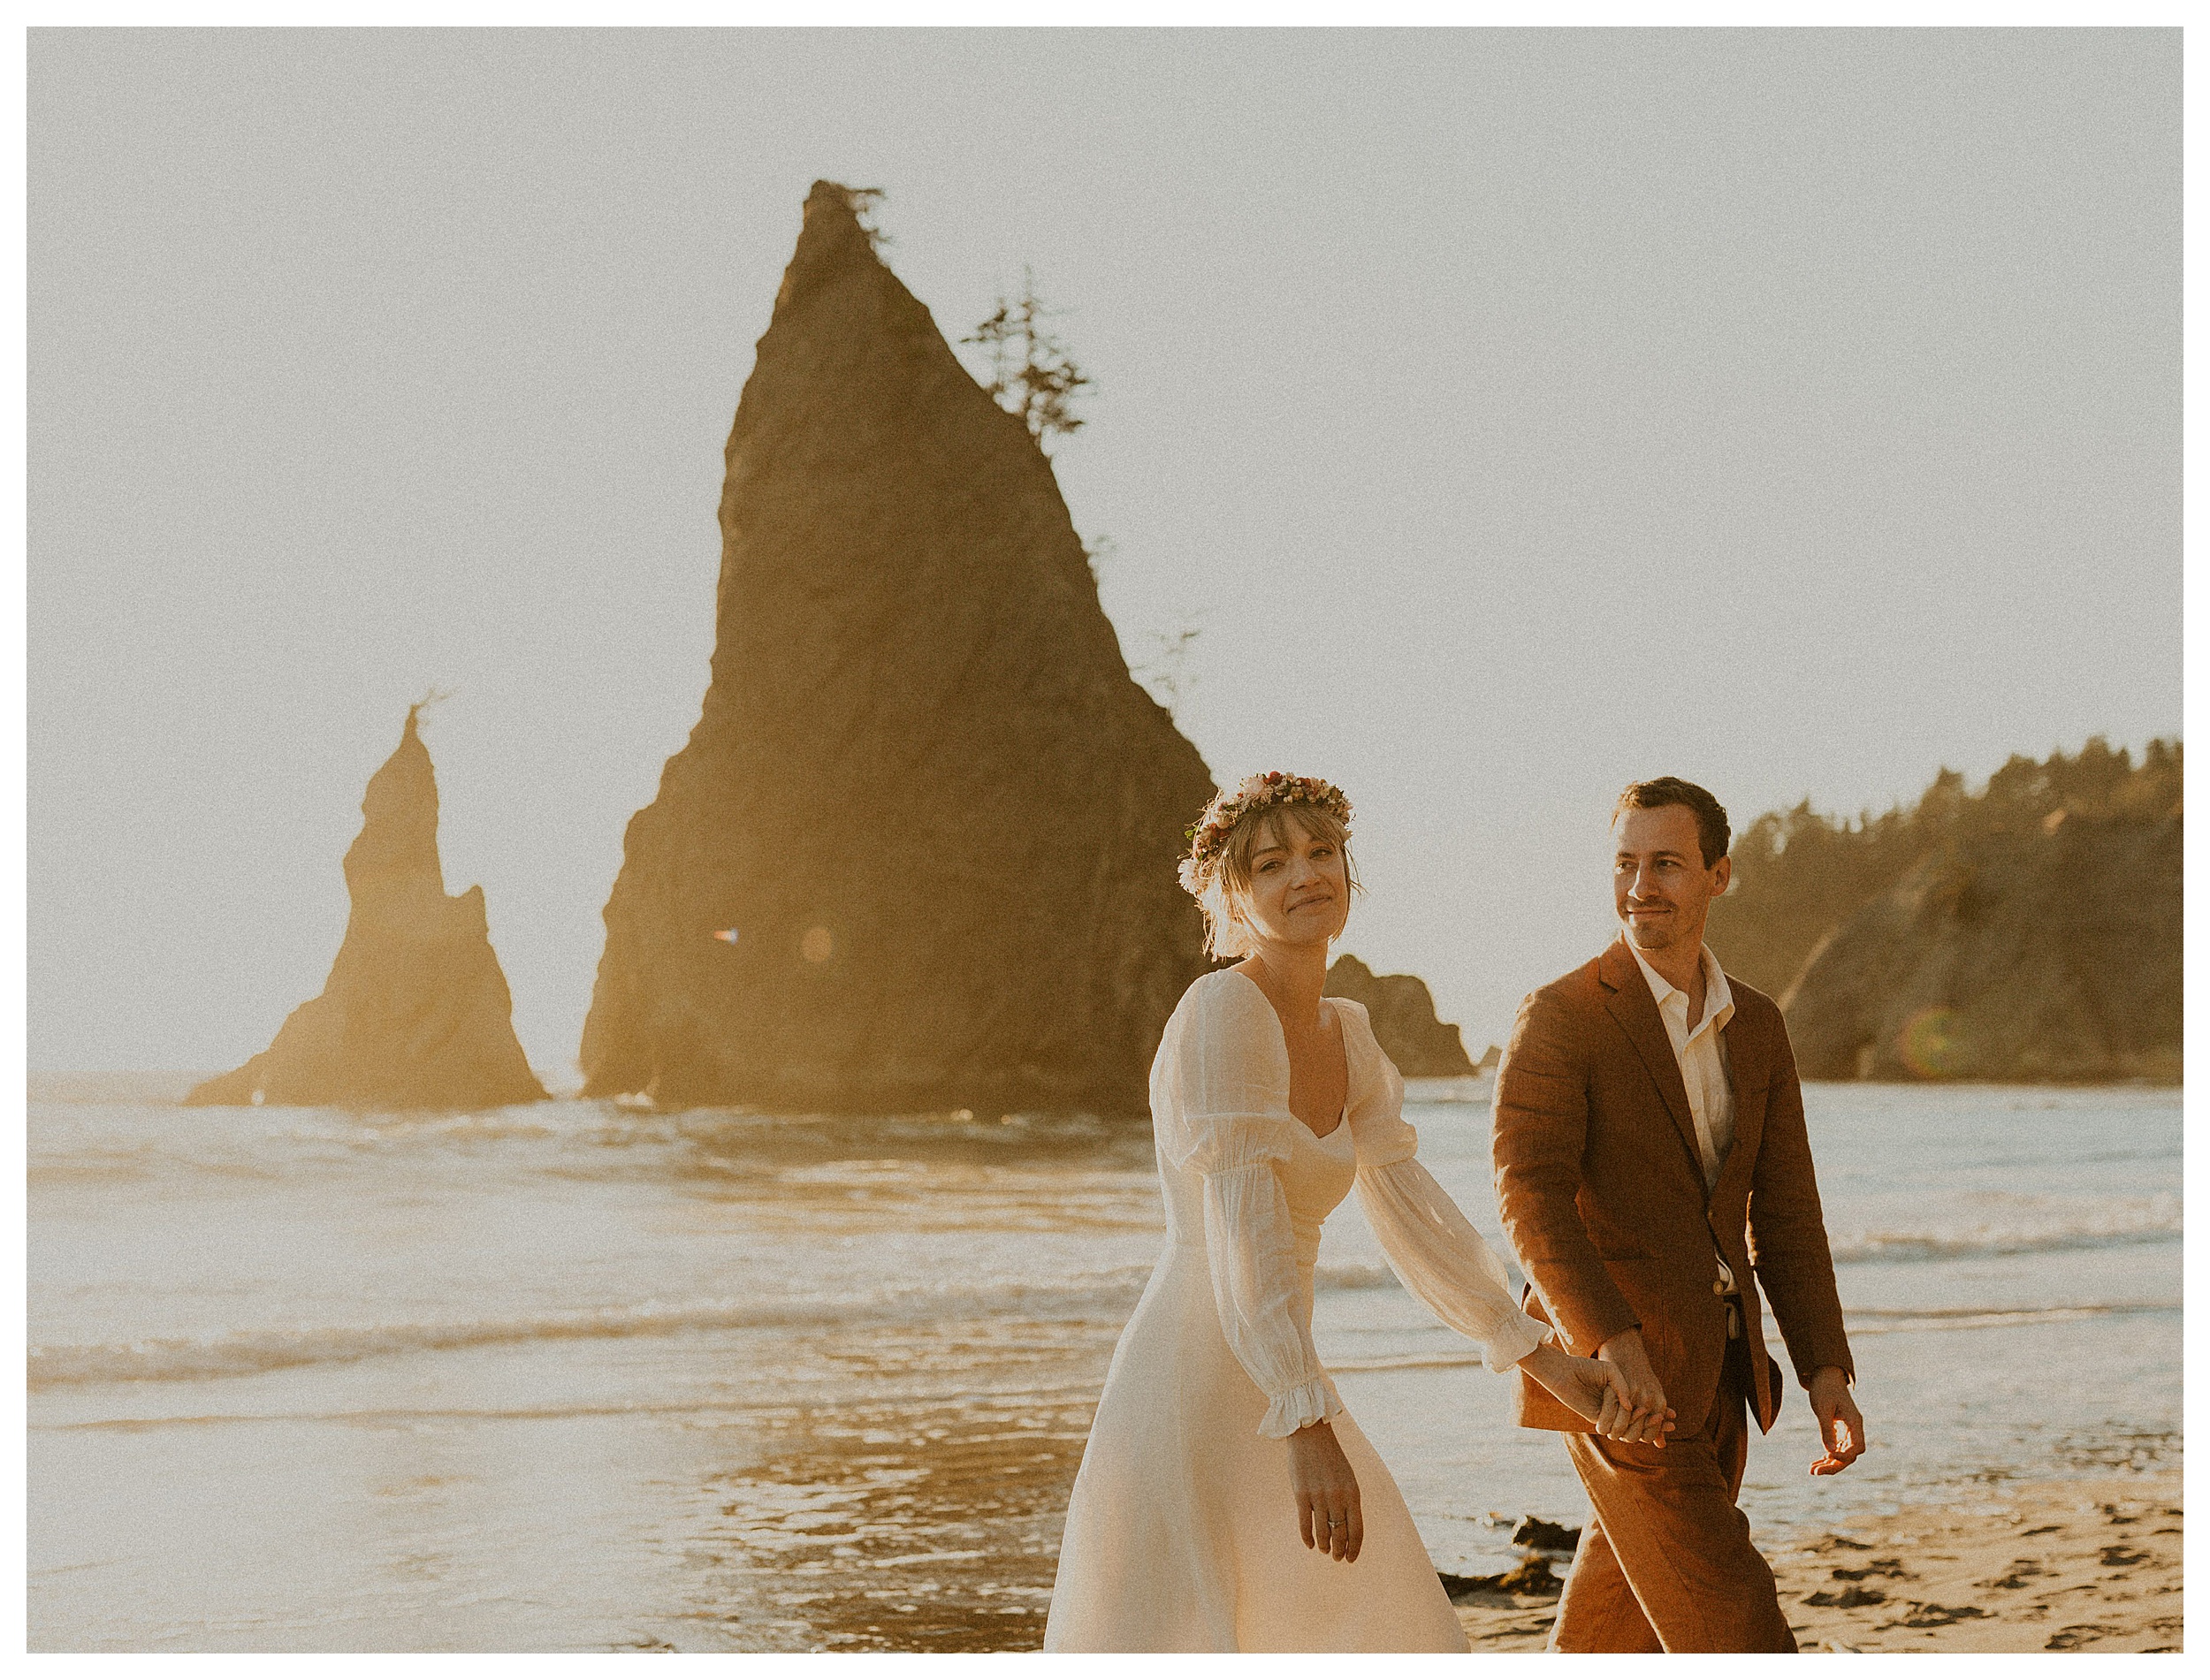 bride and groom walking together rialto beach

